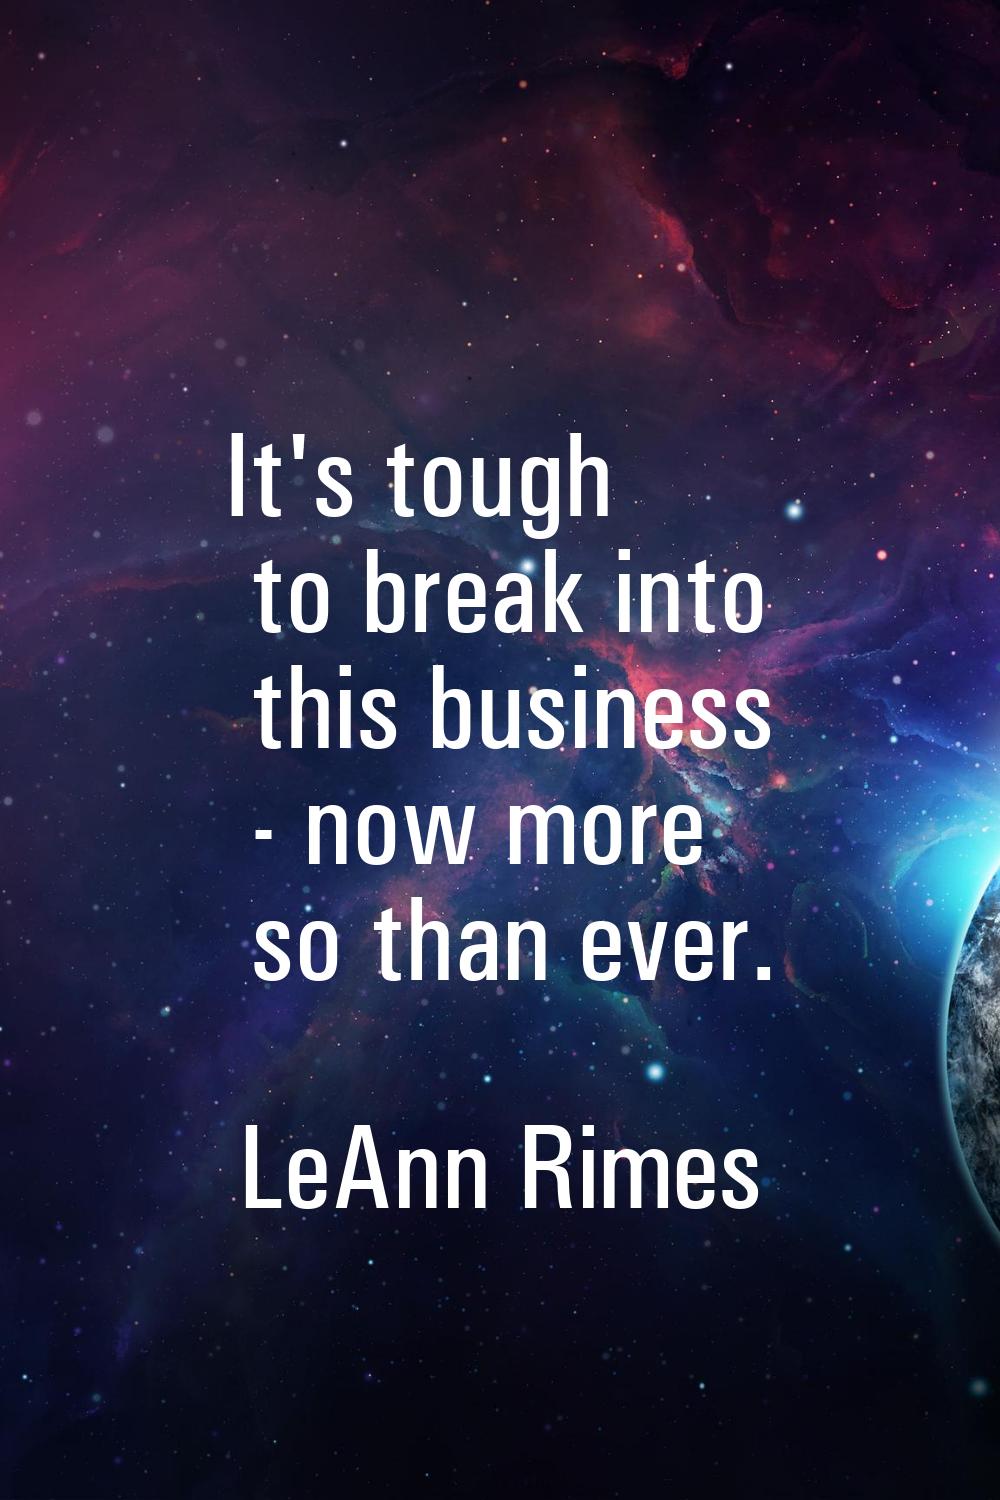 It's tough to break into this business - now more so than ever.